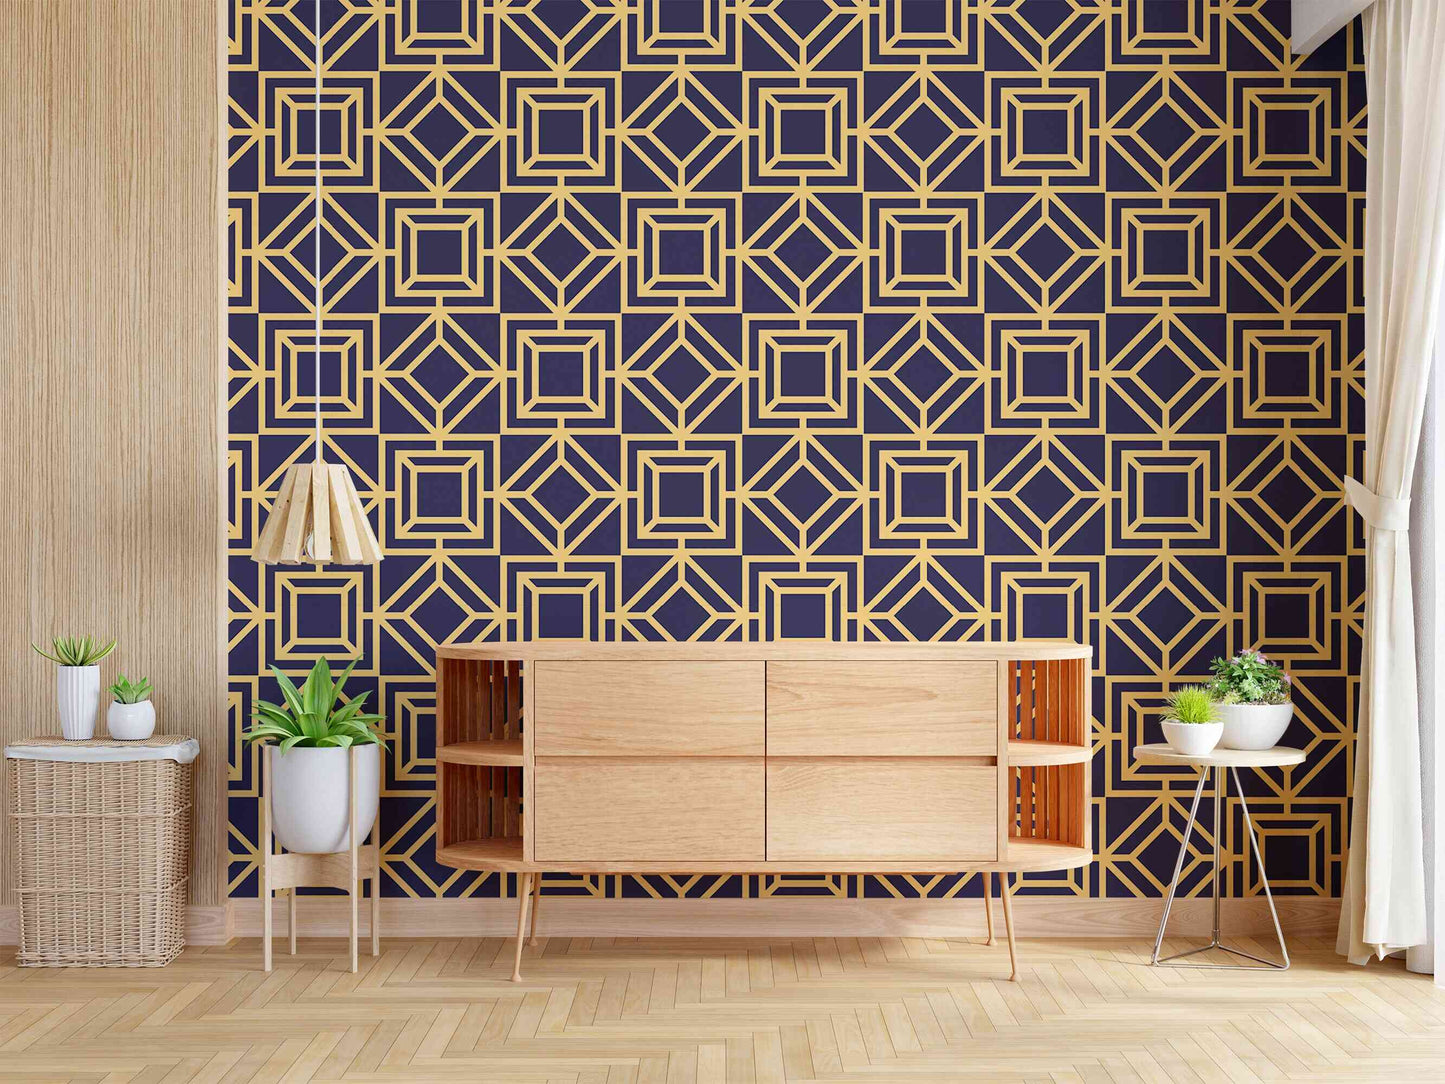 Geometric self-stick wallpaper offering a chic and refined look.